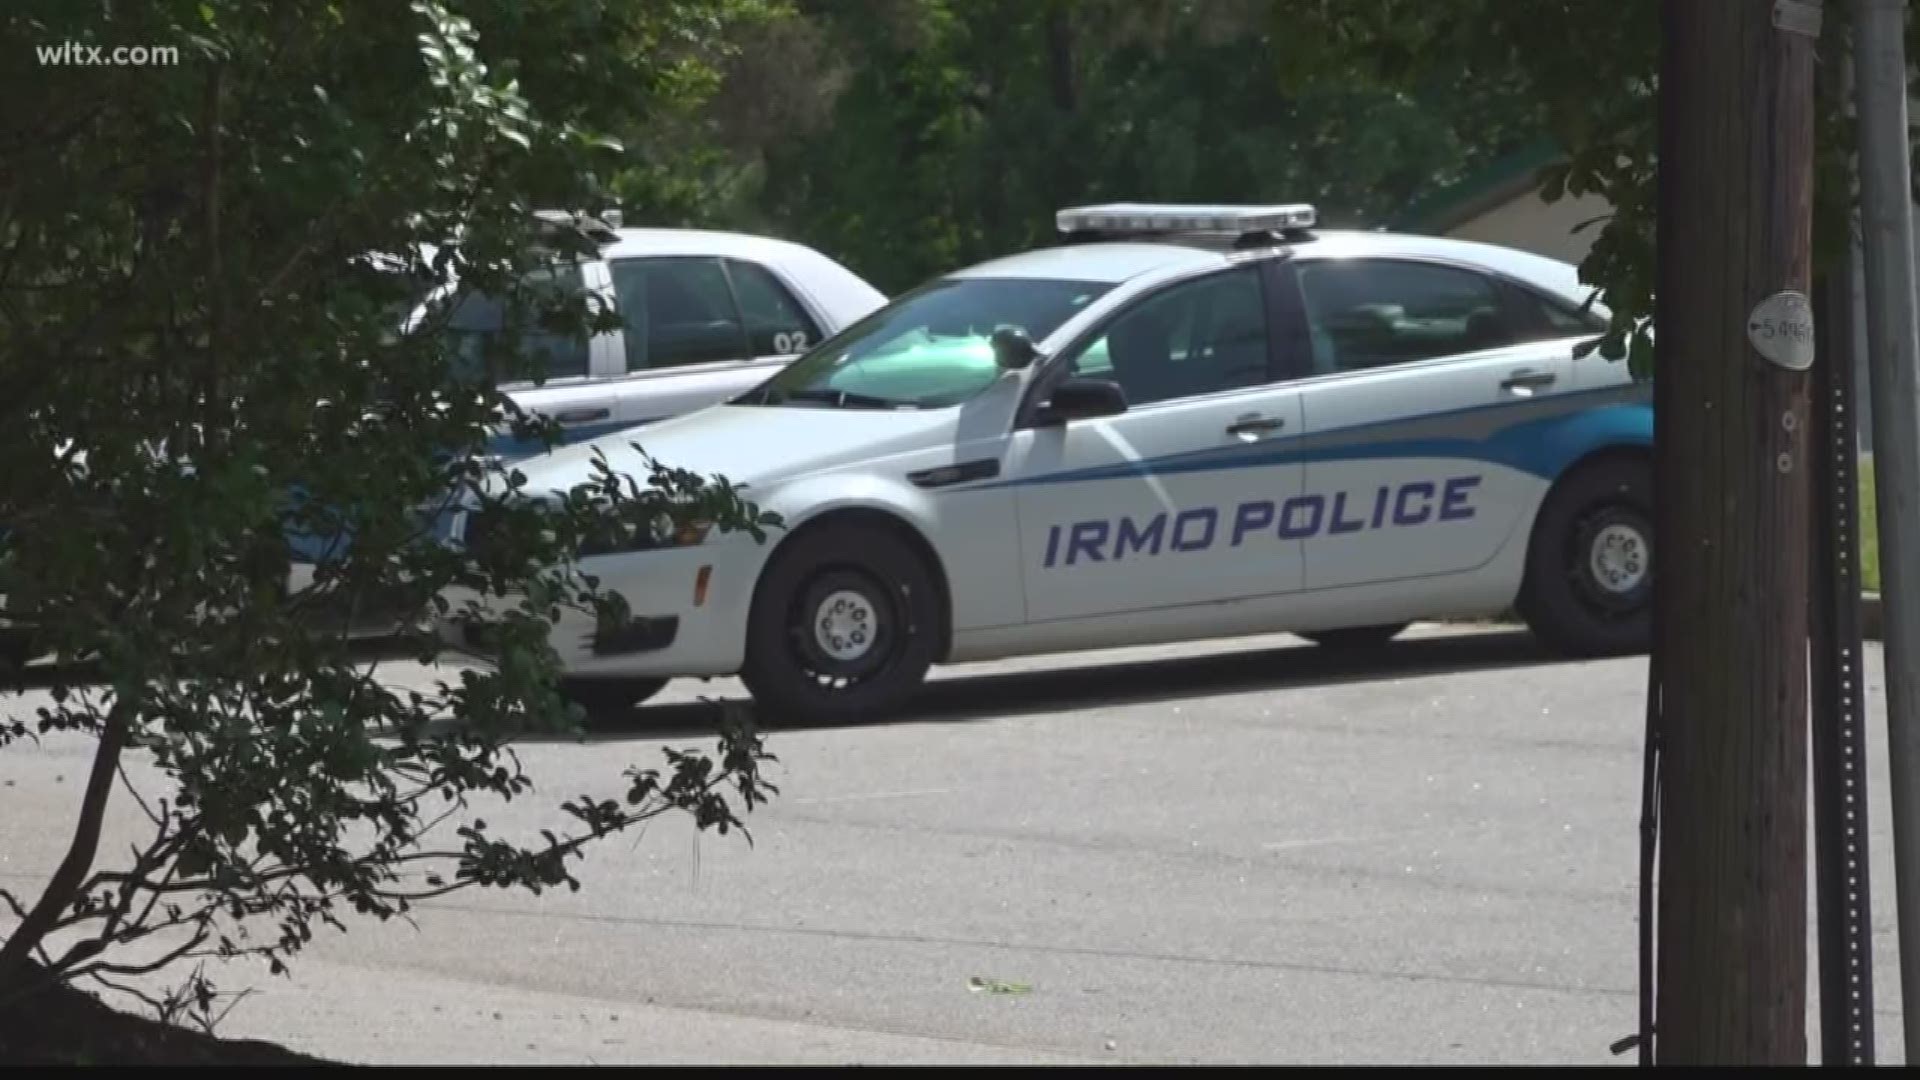 Due to recent reviews of crash data, Irmo police will have some extra patrol this weekend.